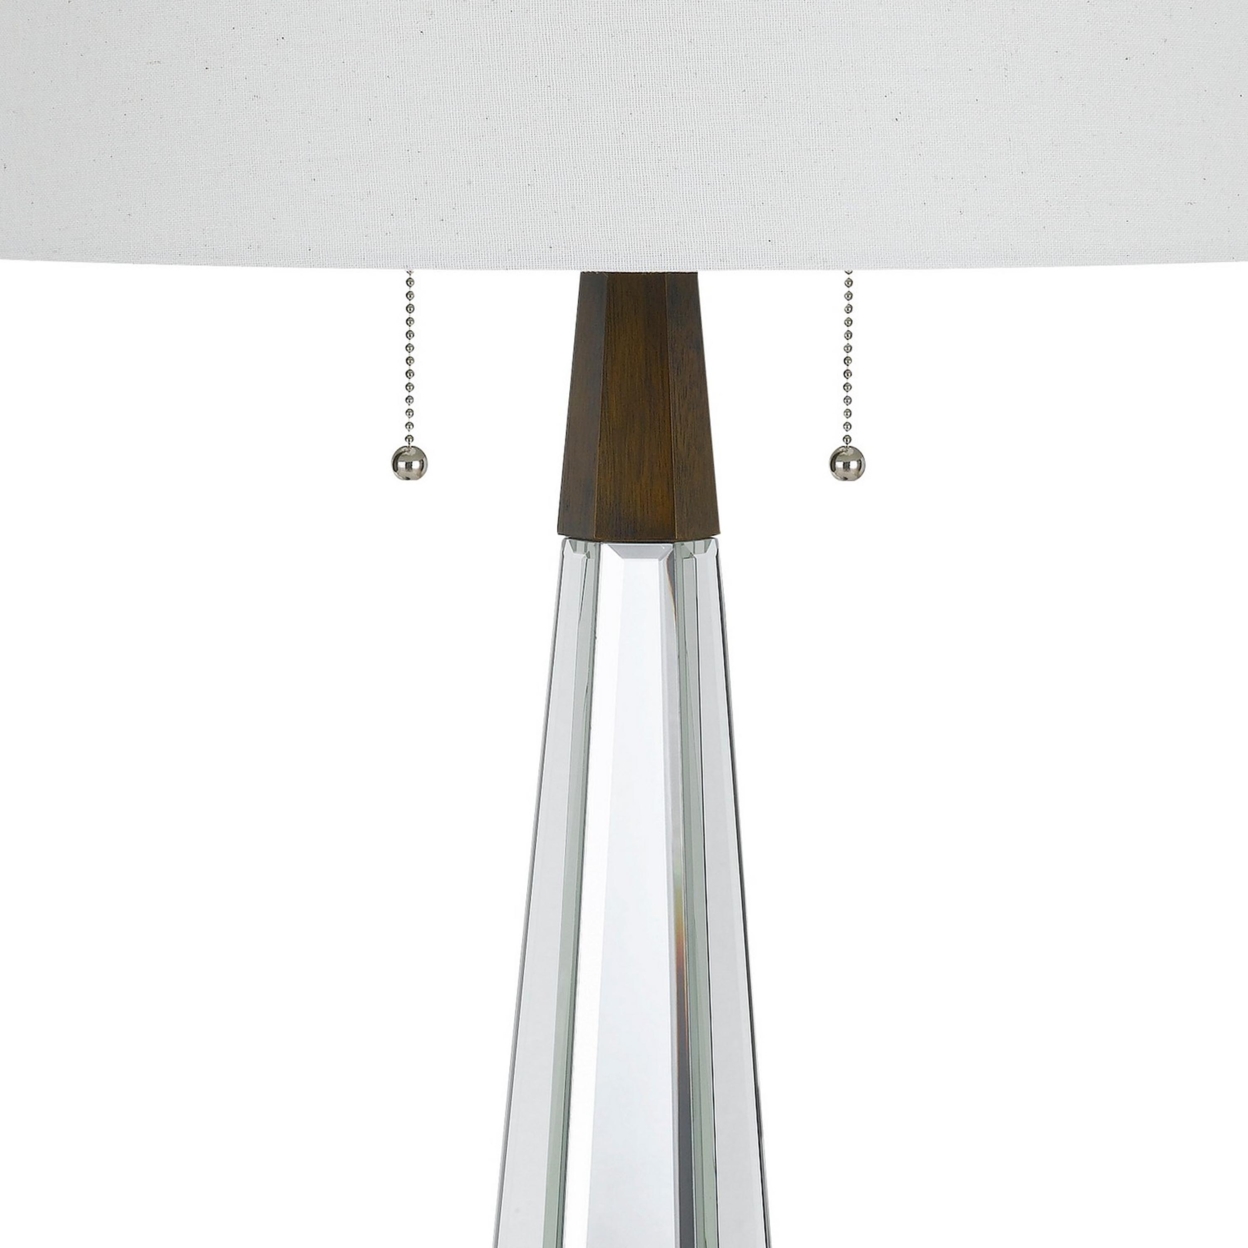 Fabric Shade Table Lamp With Faceted Mirror And Wooden Base, White- Saltoro Sherpi